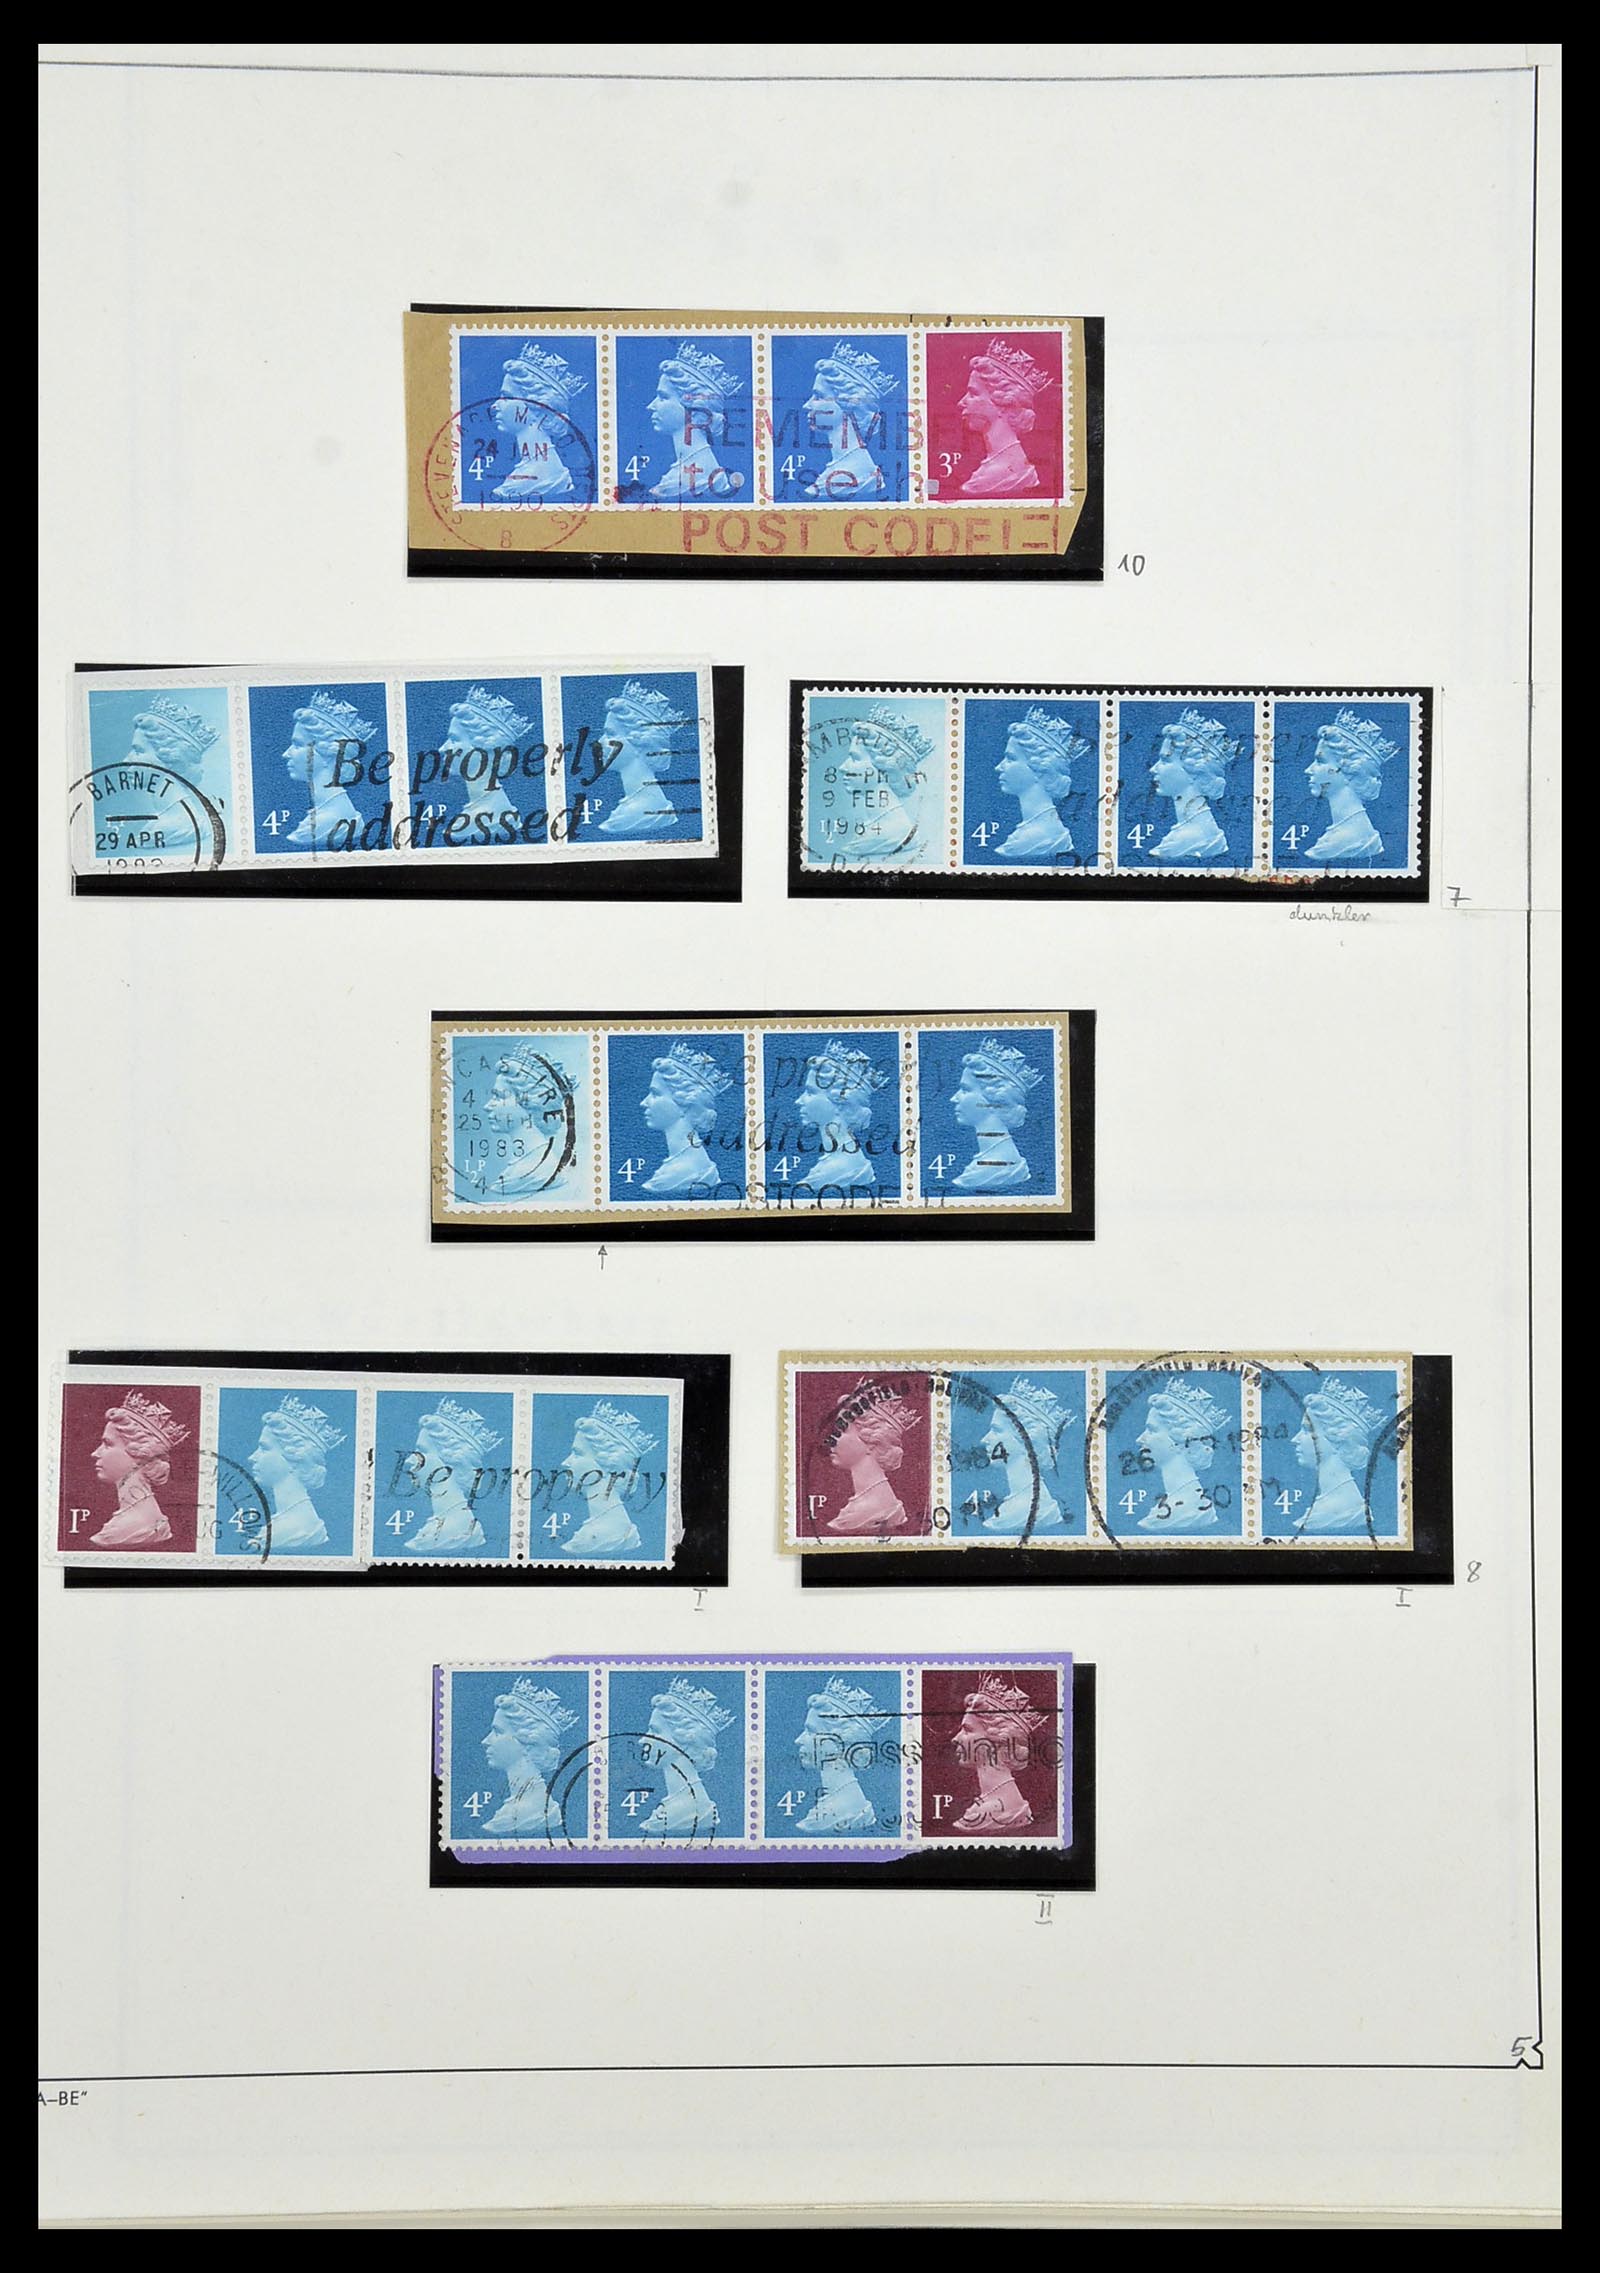 34221 182 - Stamp collection 34221 Great Britain Machins/castles 1971-2005.